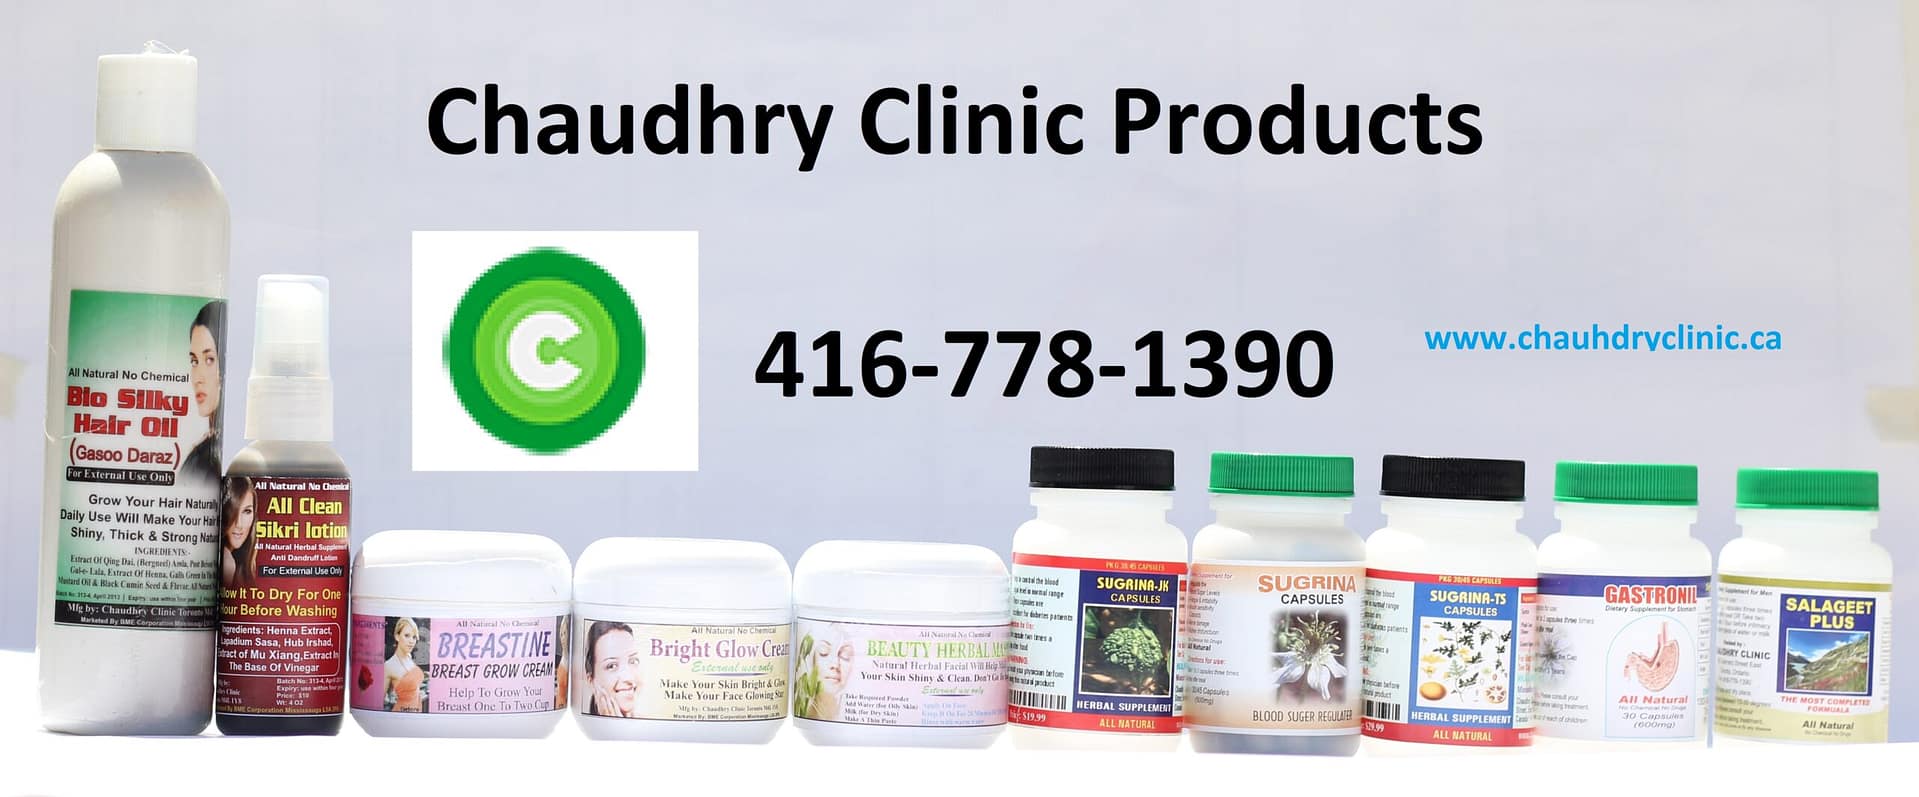 chaudhry clinic herbal products